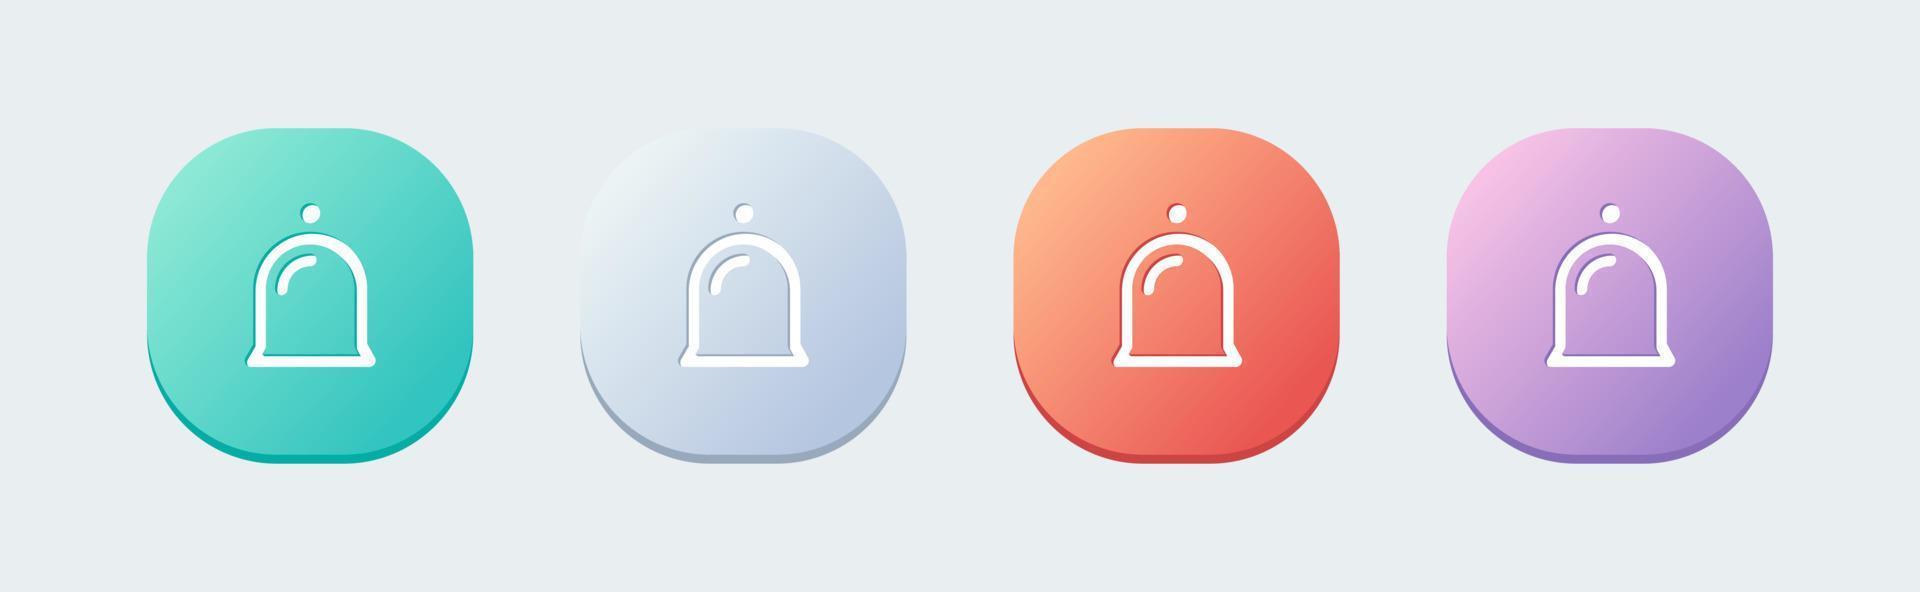 Bell notification line icon in flat design style. Alert signs vector illustration.